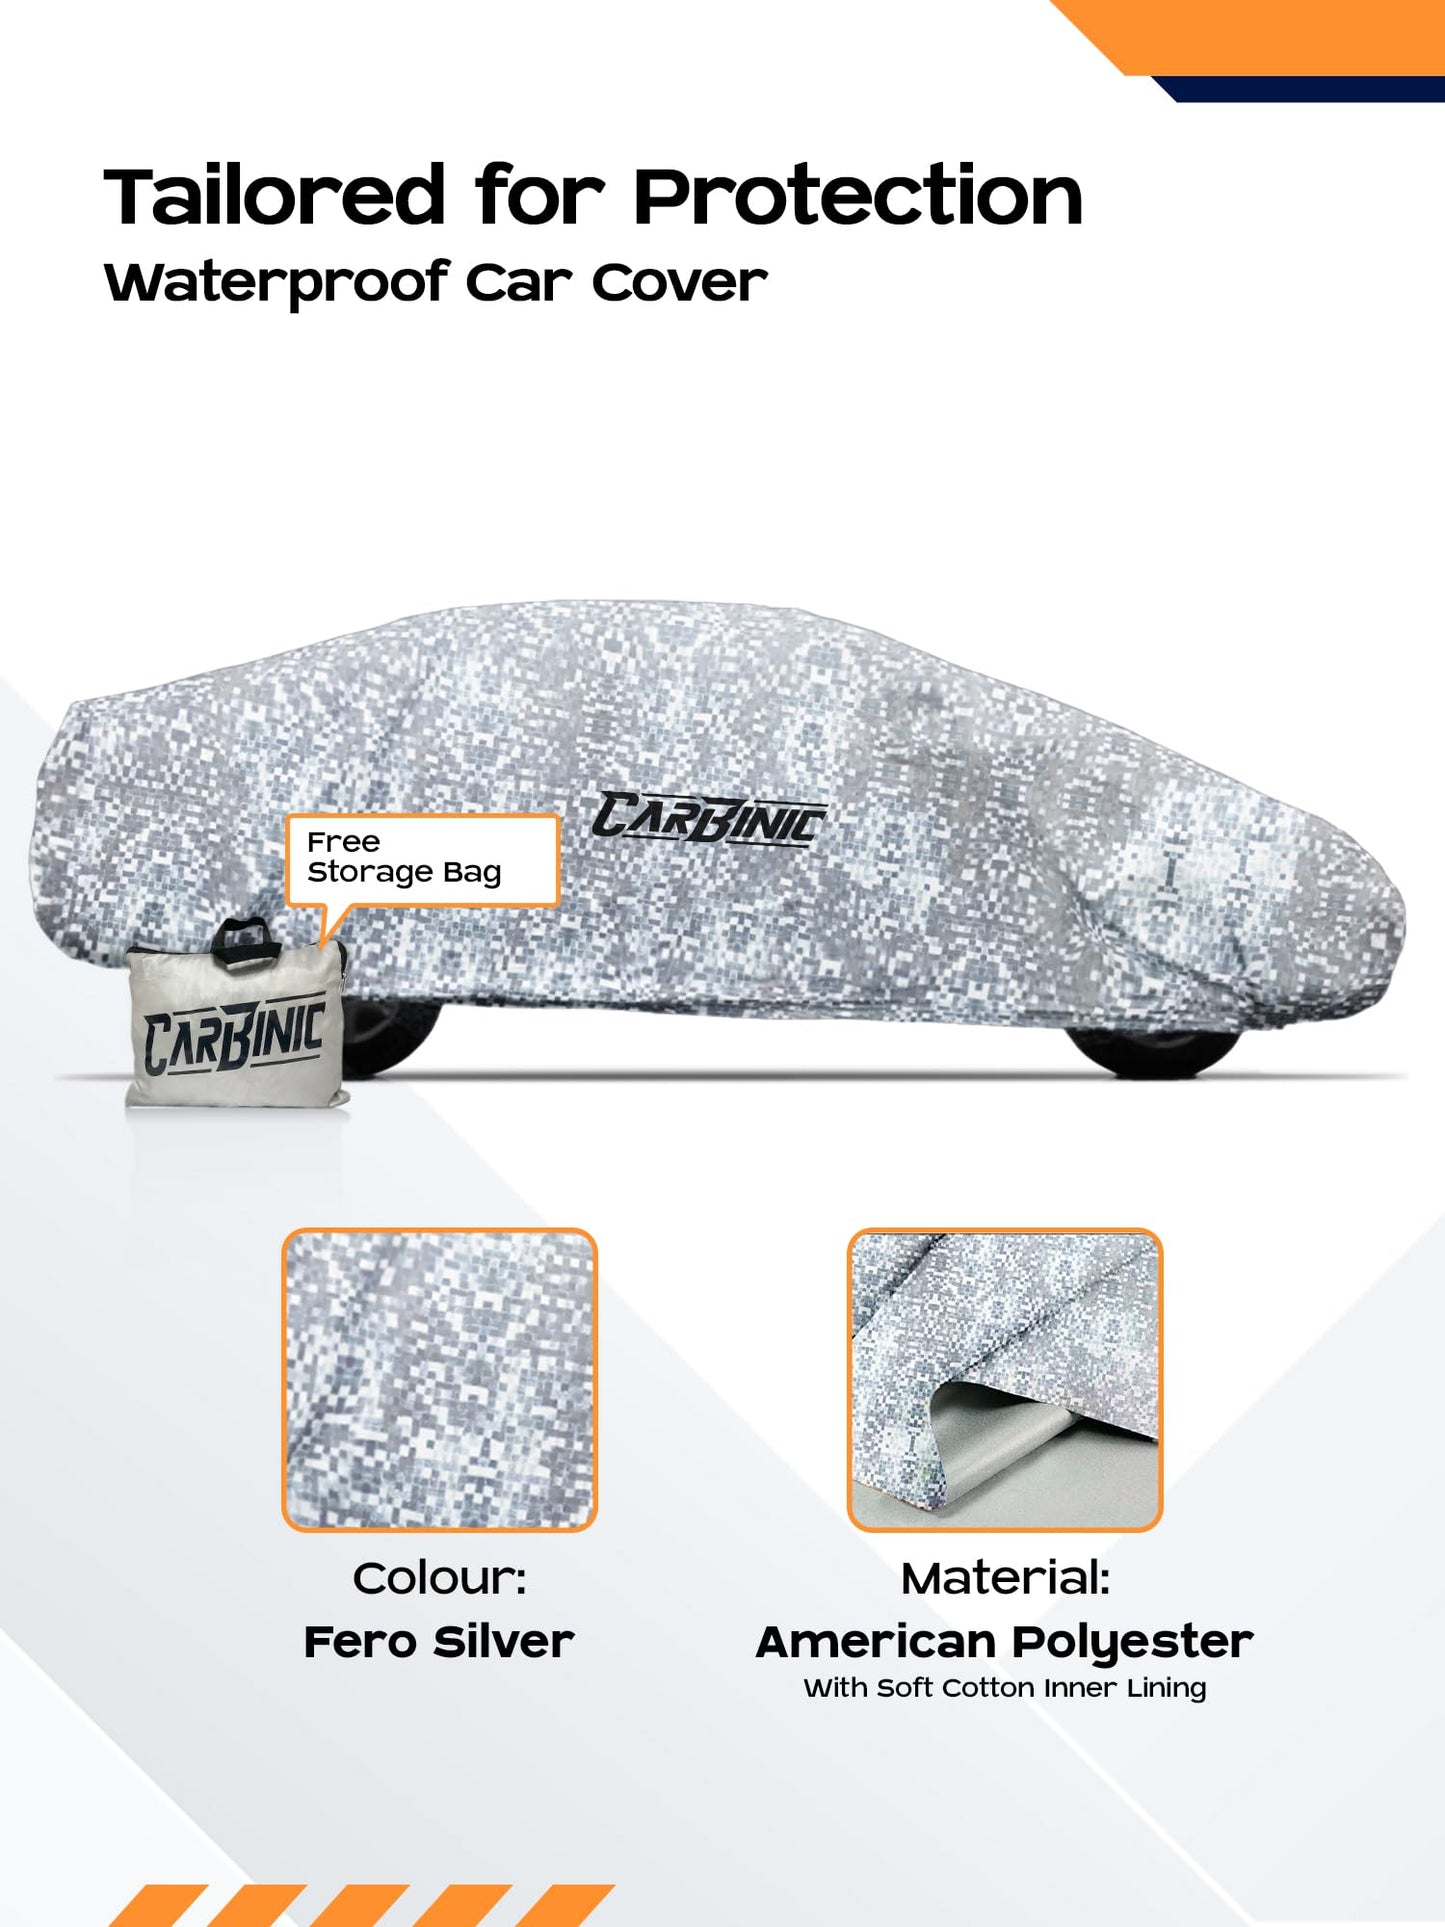 CARBINIC Car Cover for Tata Tigor2021 Waterproof Tested and Dustproof Custom Fit UV Heat Resistant Outdoor Protection with Triple Stitched Fully Elastic Surface  Silver with Pockets